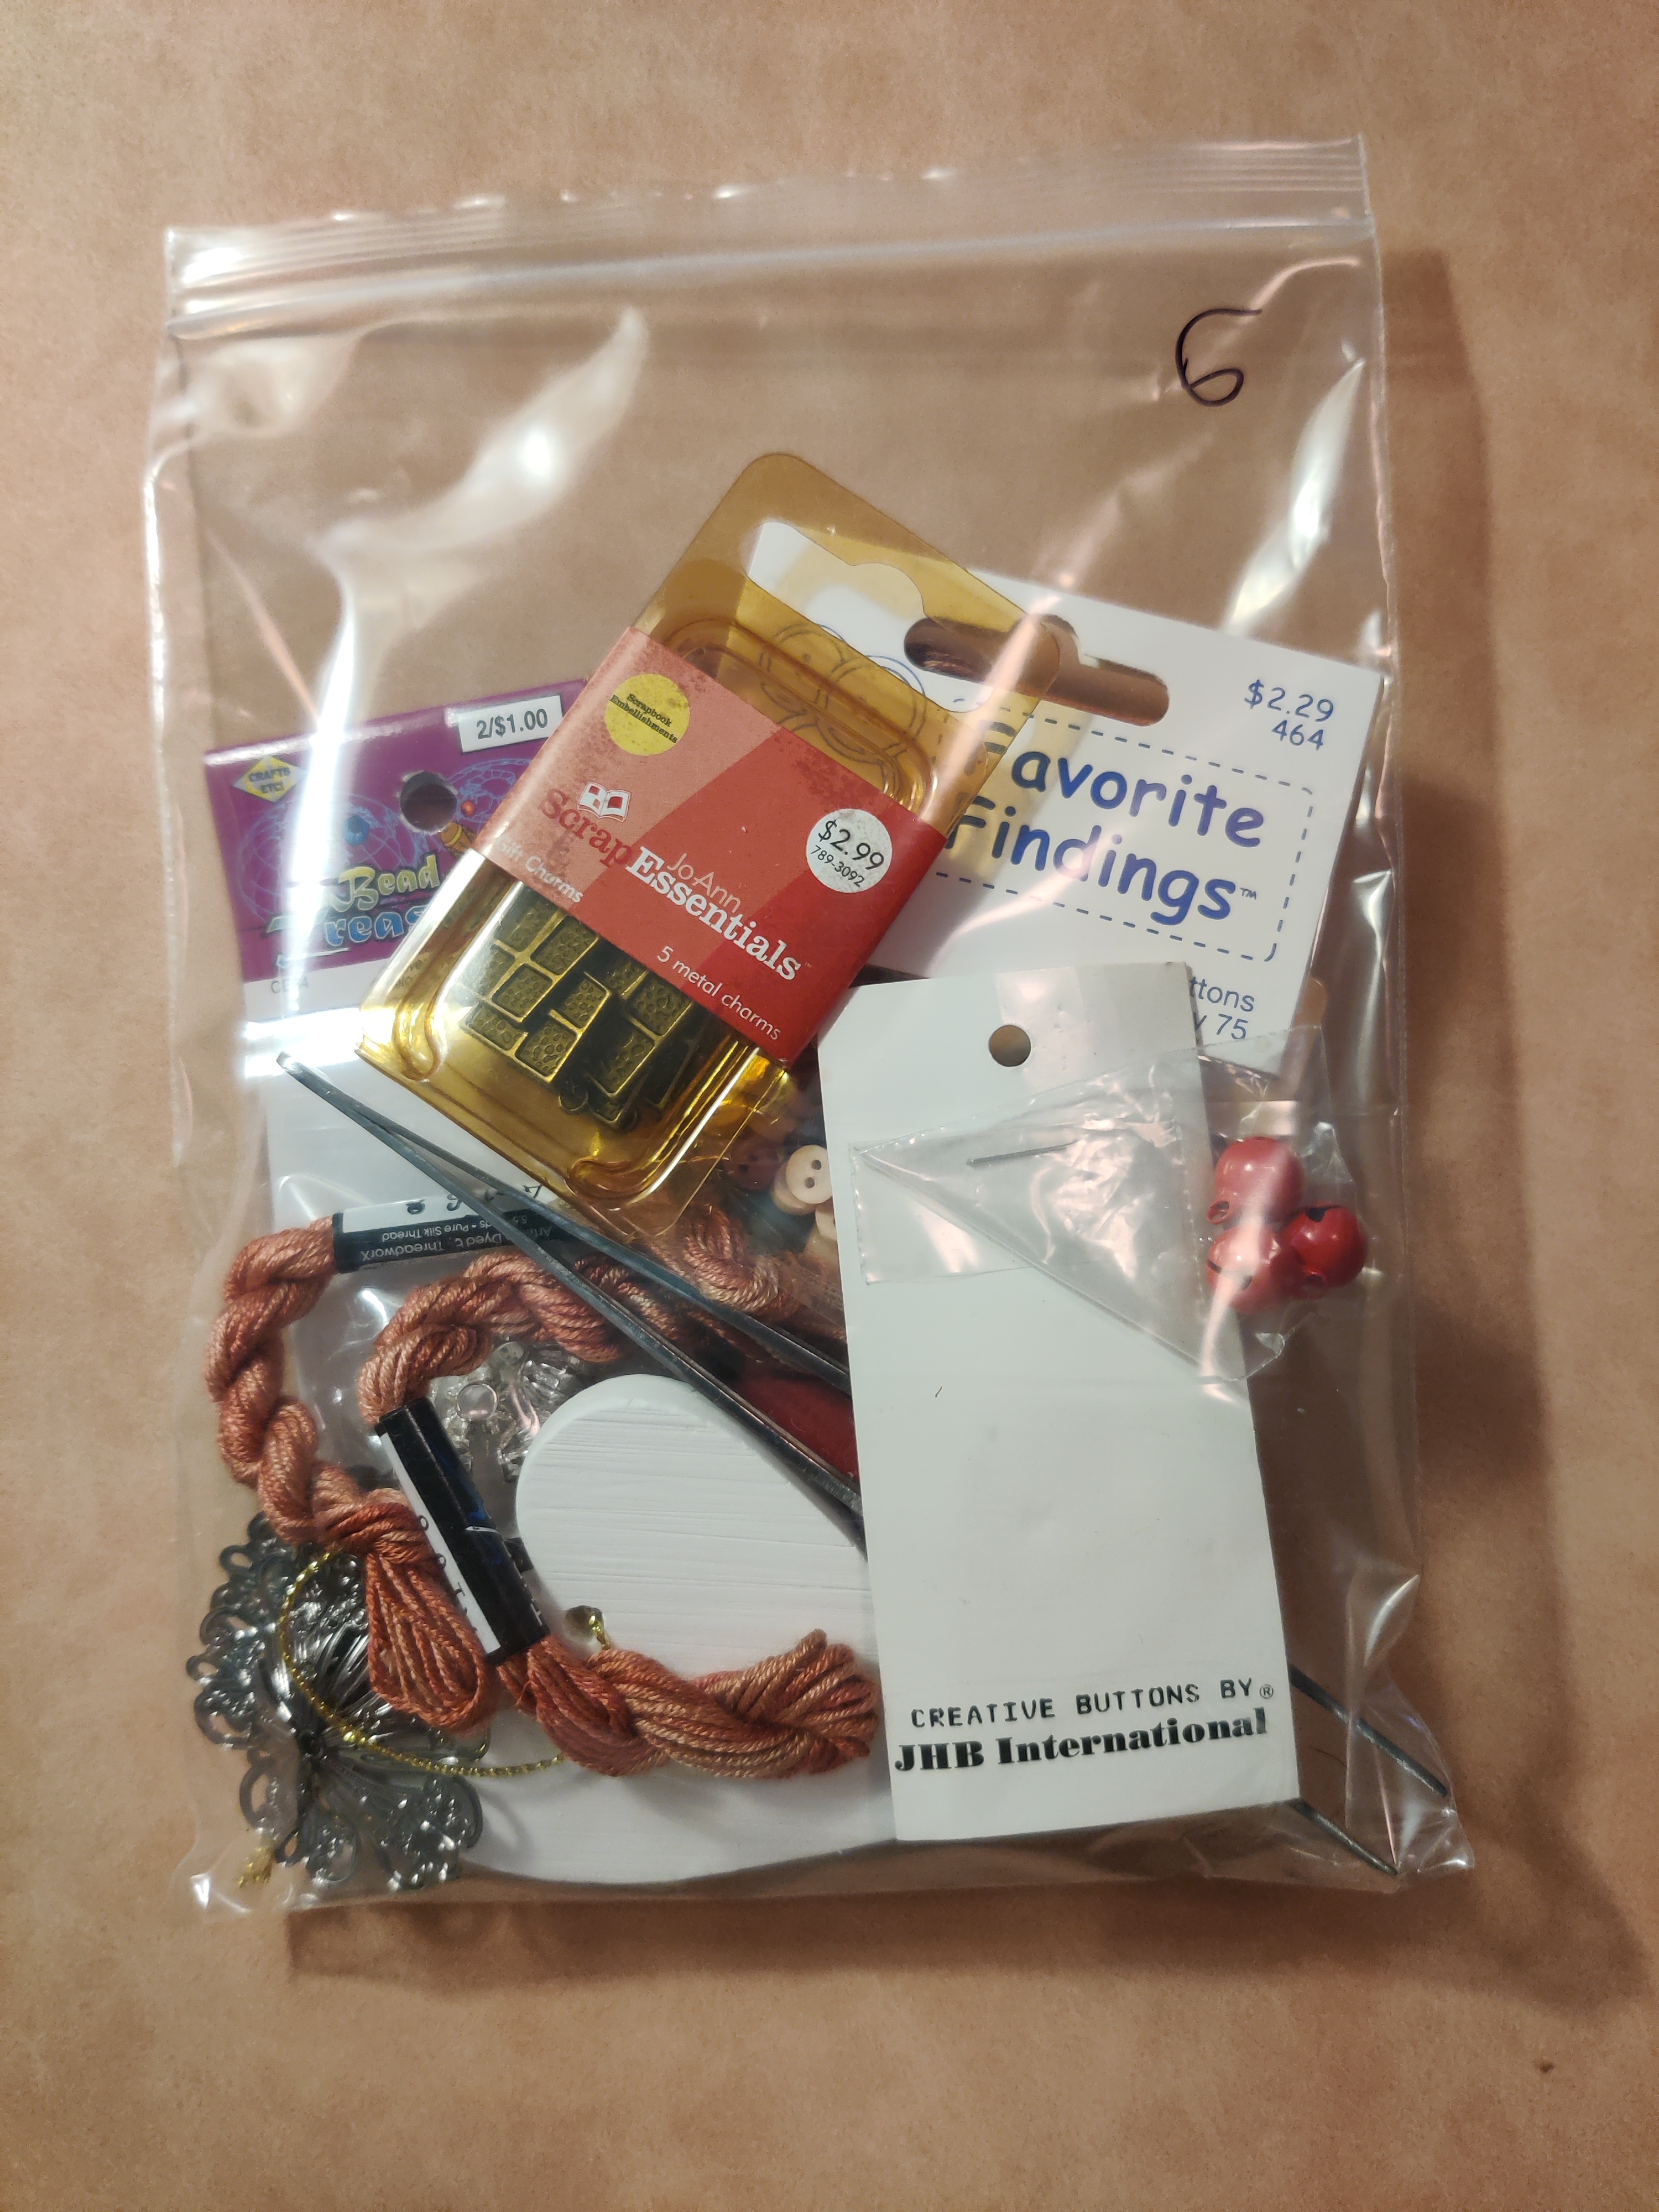 Bagged Items 6